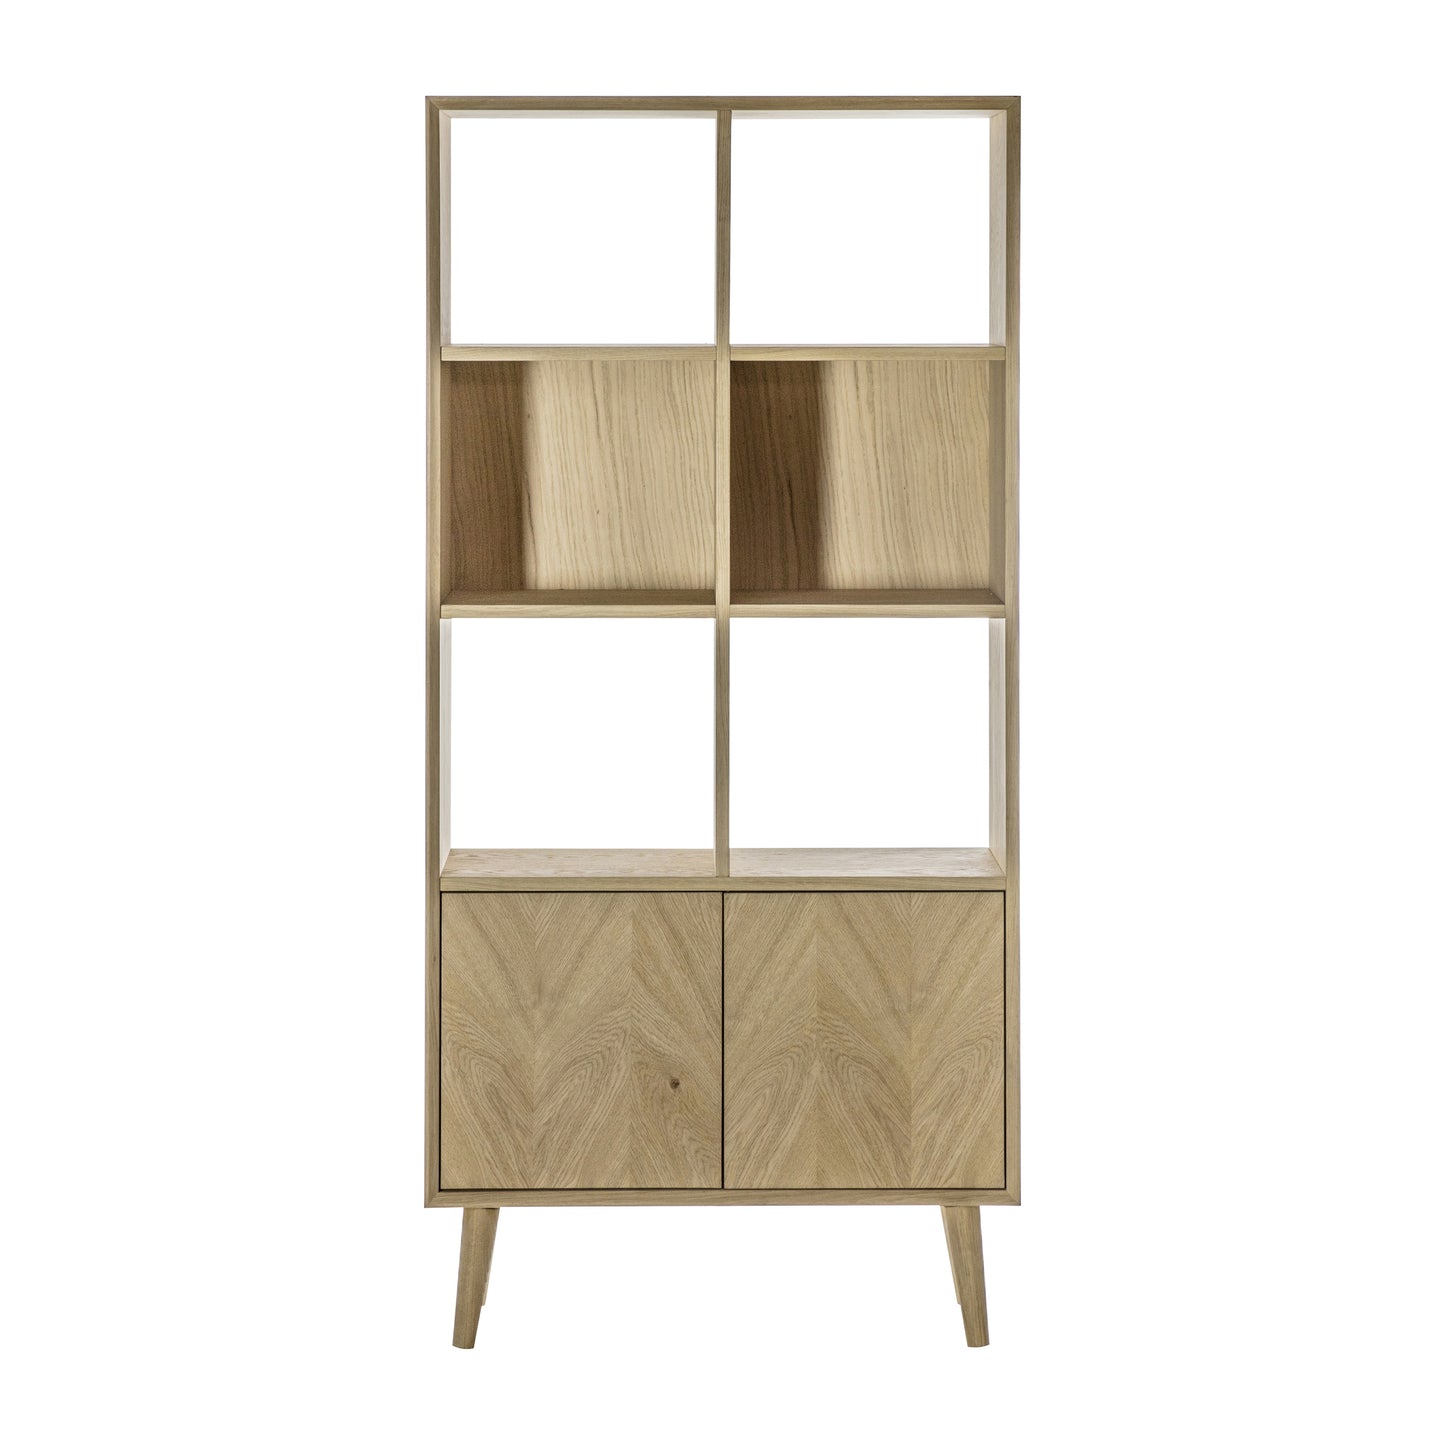 A Tristford 2 Door Open Display bookcase from Kikiathome.co.uk, perfect for interior decor and home furniture needs.